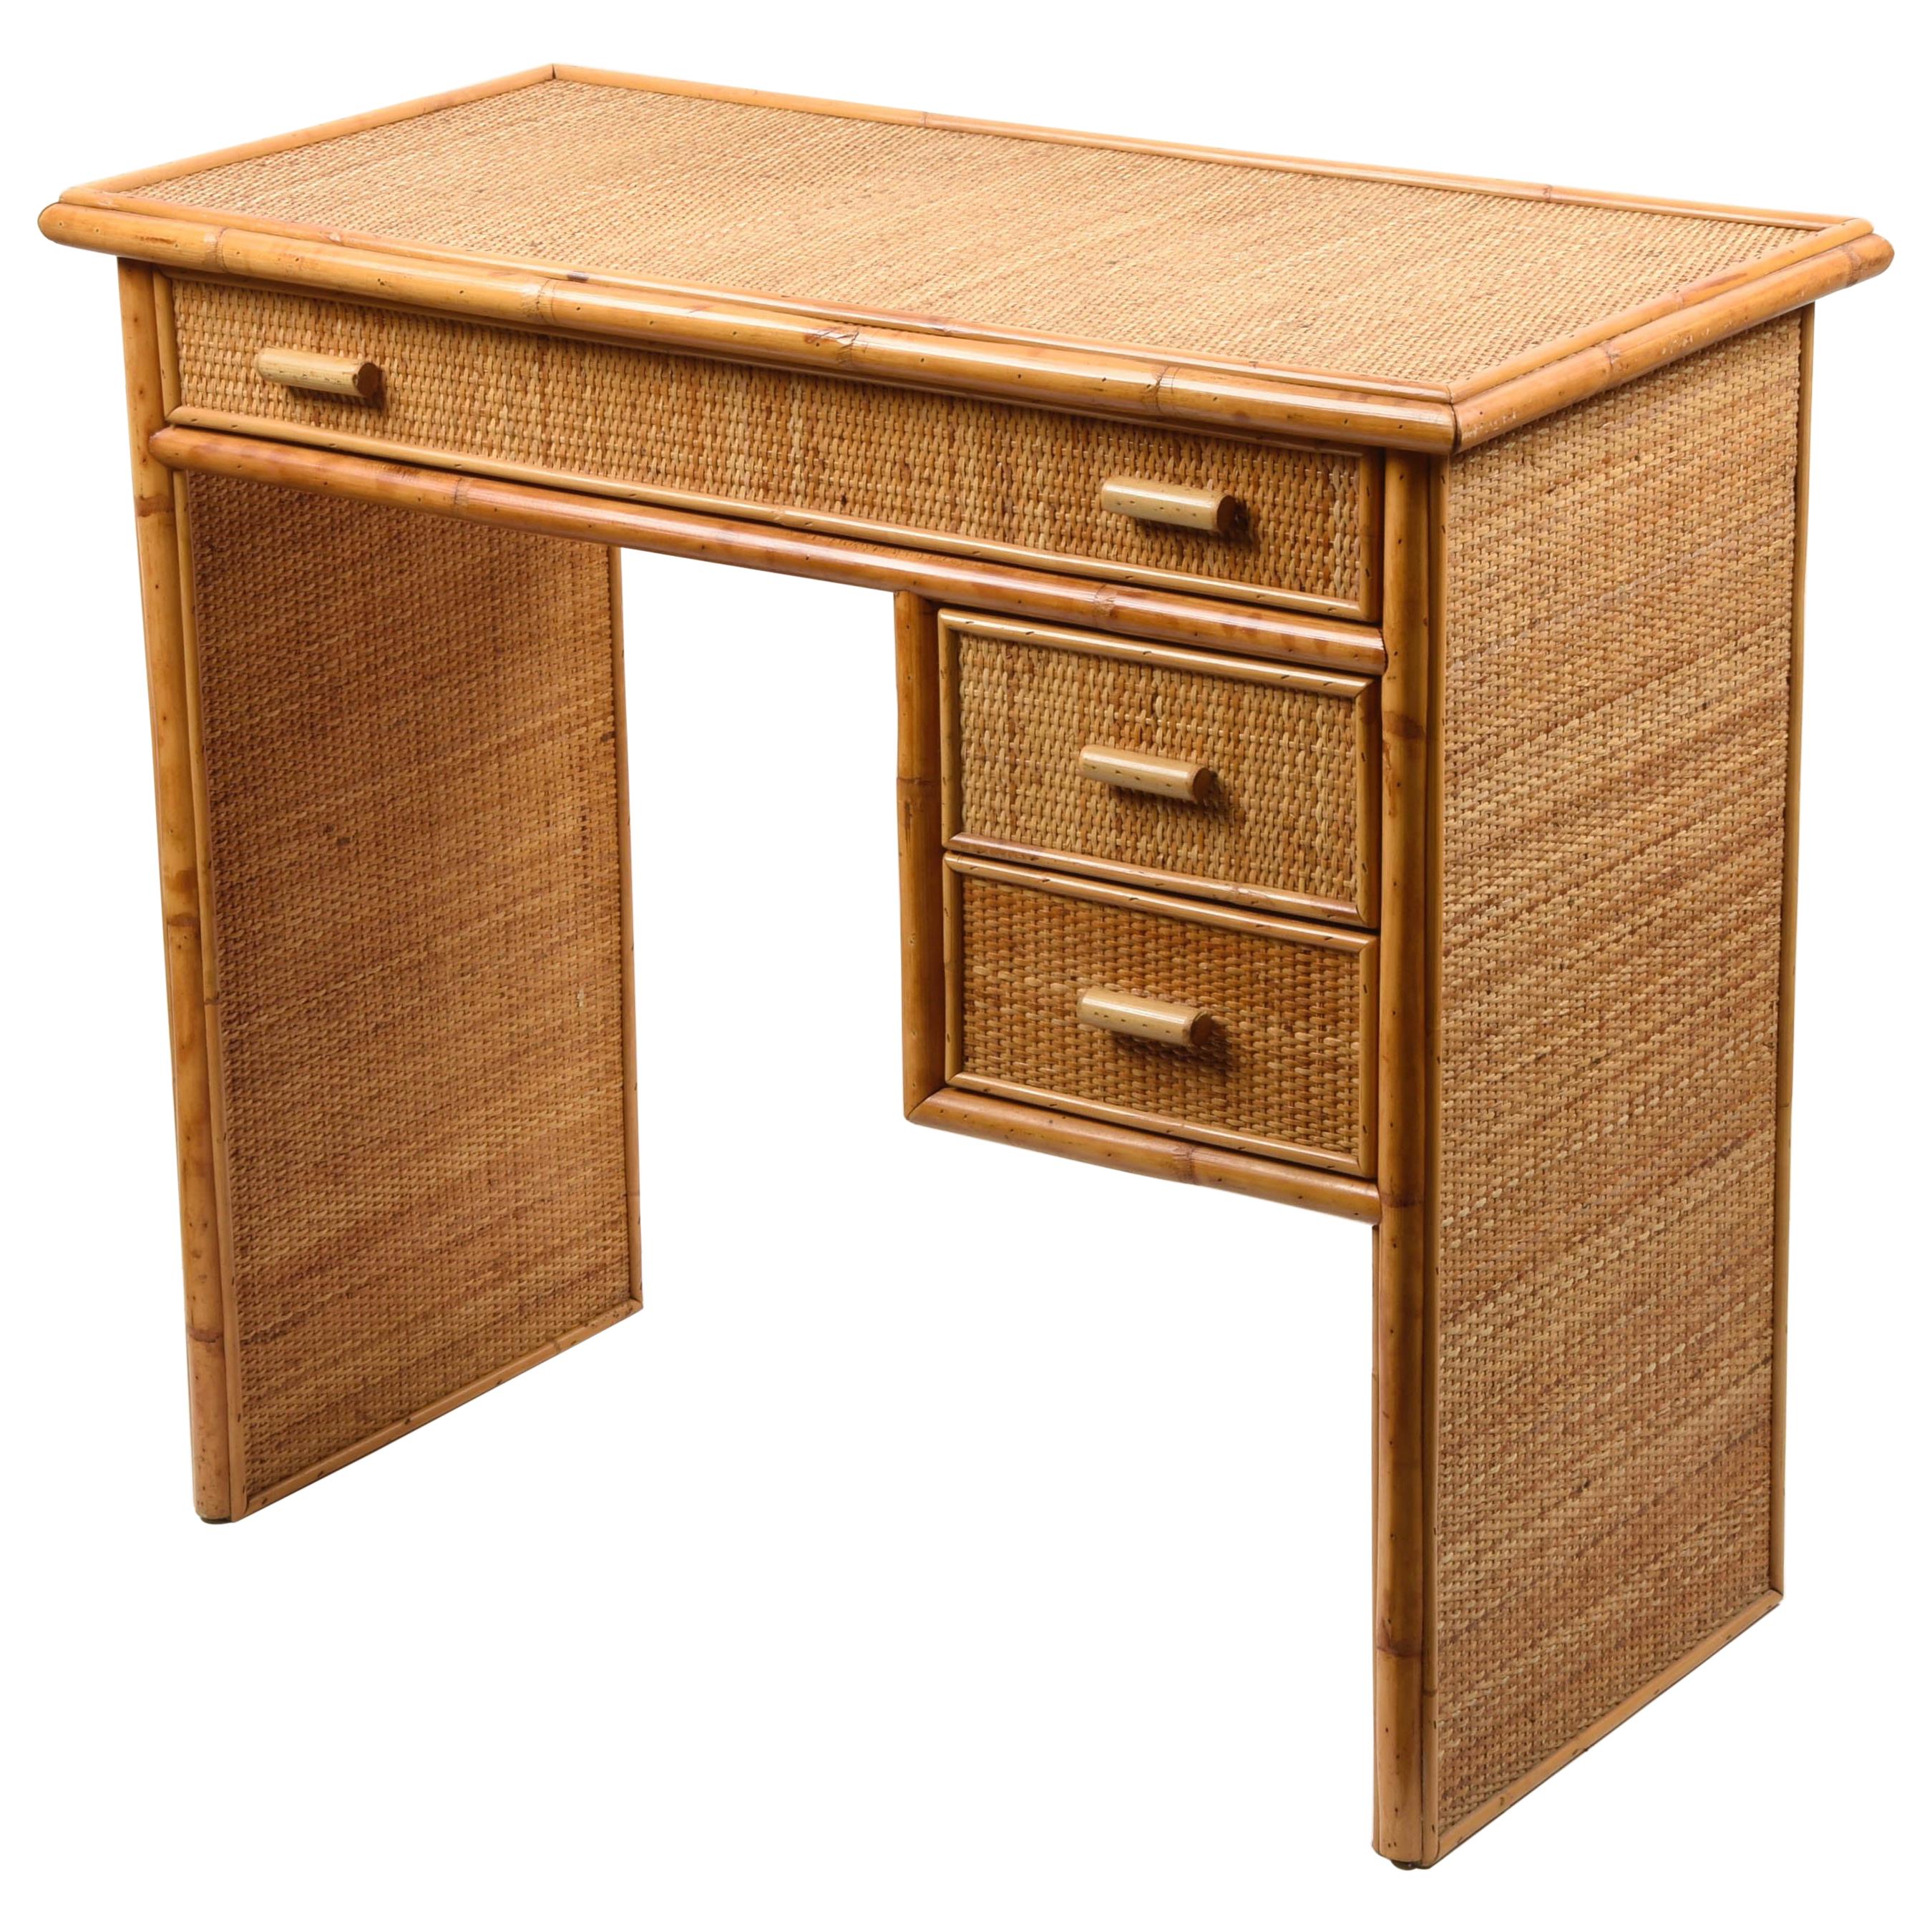 Midcentury Bamboo and Wicker Italian Desk with Drawers, 1980s